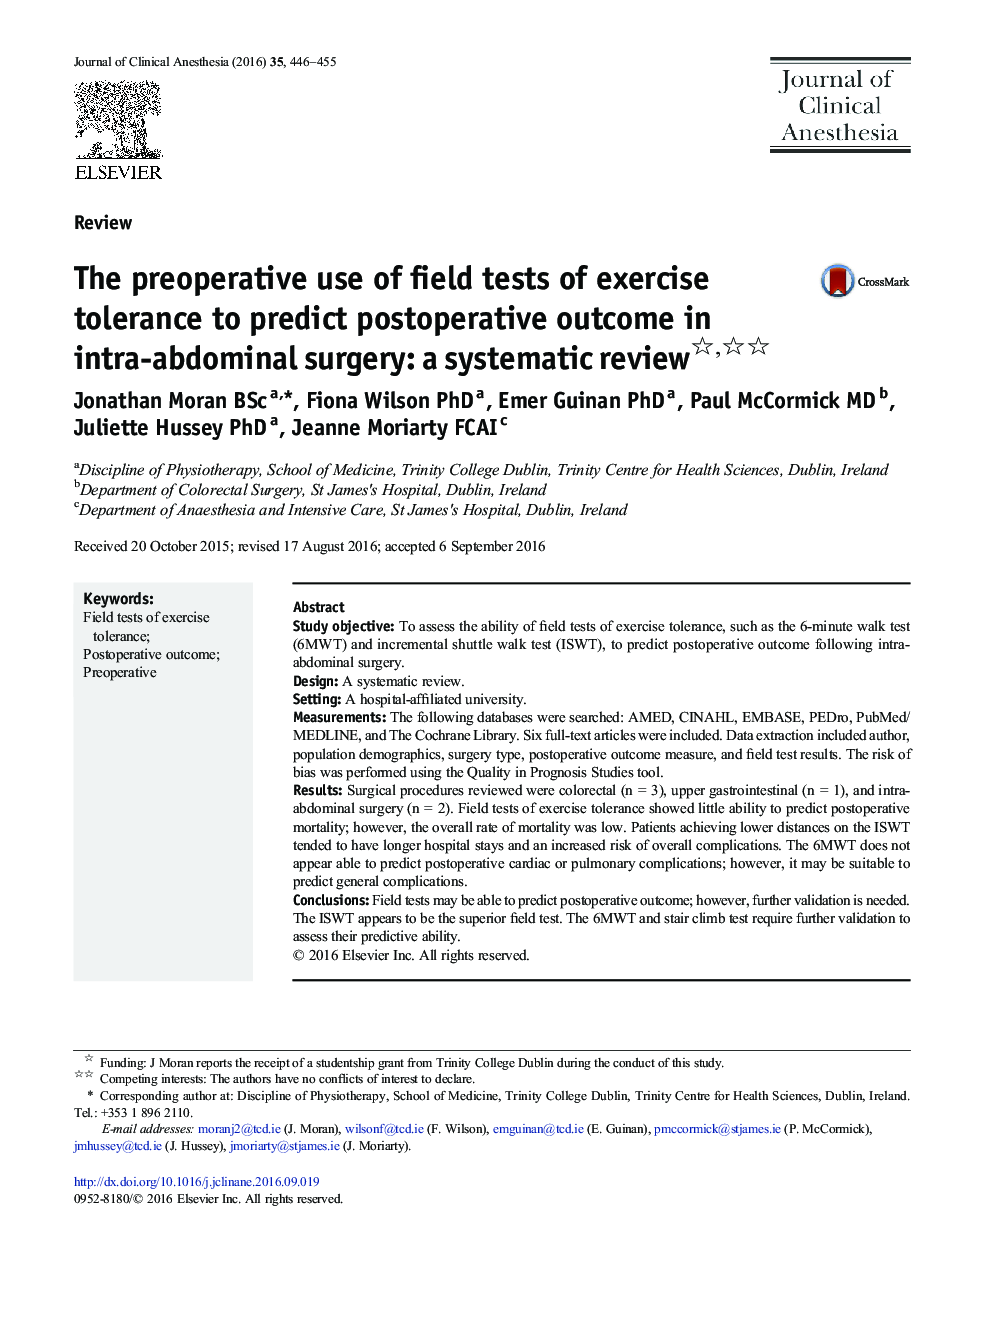 ReviewThe preoperative use of field tests of exercise tolerance to predict postoperative outcome in intra-abdominal surgery: a systematic review